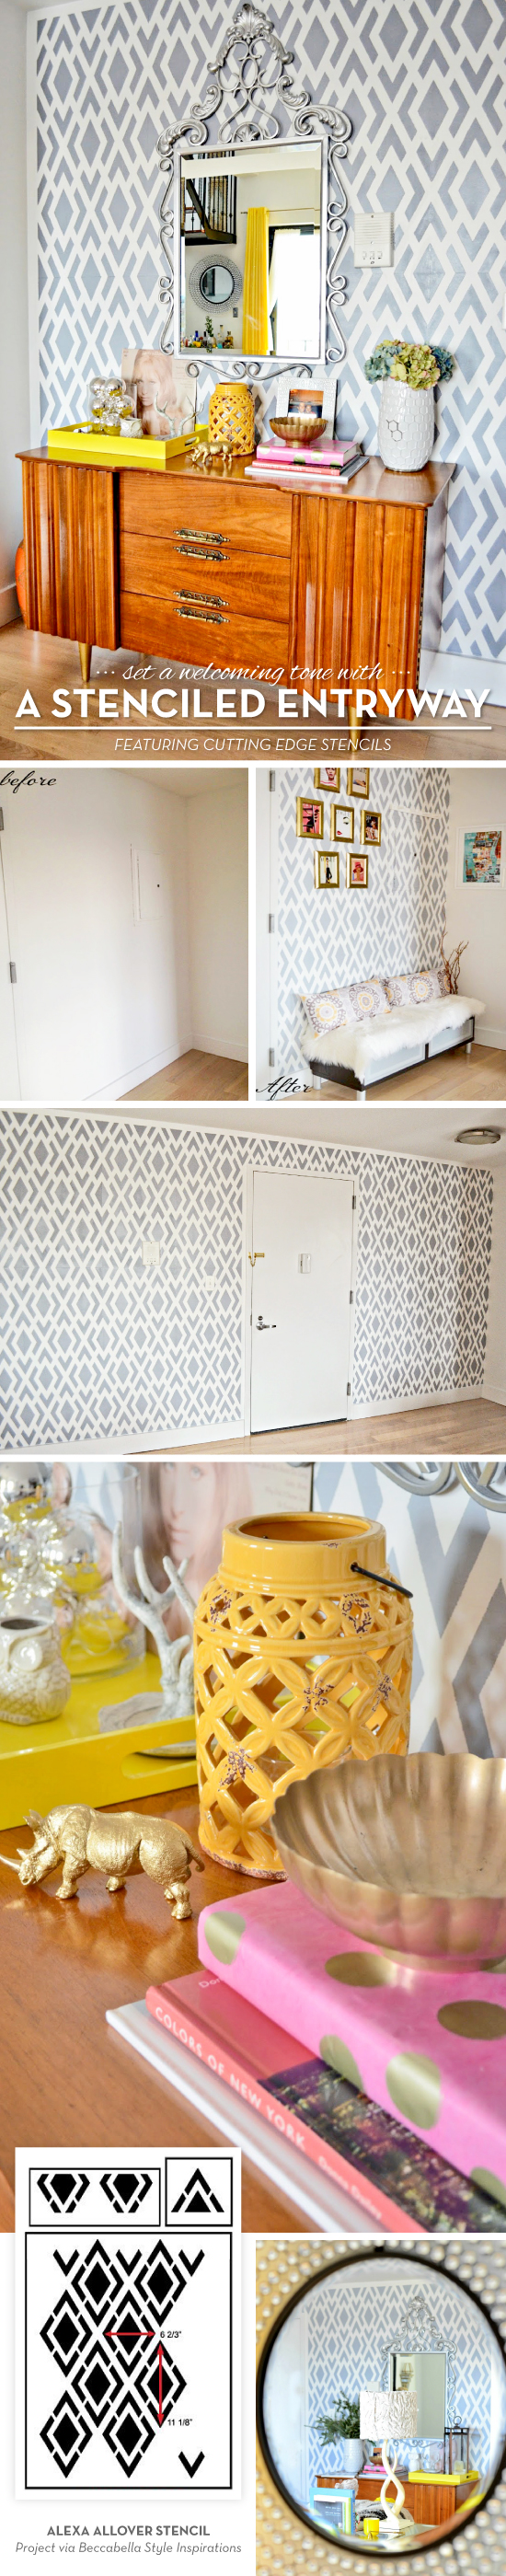 Cutting Edge Stencils shares a DIY stenciled entryway makeover using the Alexa Allover wall pattern to set a welcoming tone. http://www.cuttingedgestencils.com/alexa-allover-wall-pattern.html